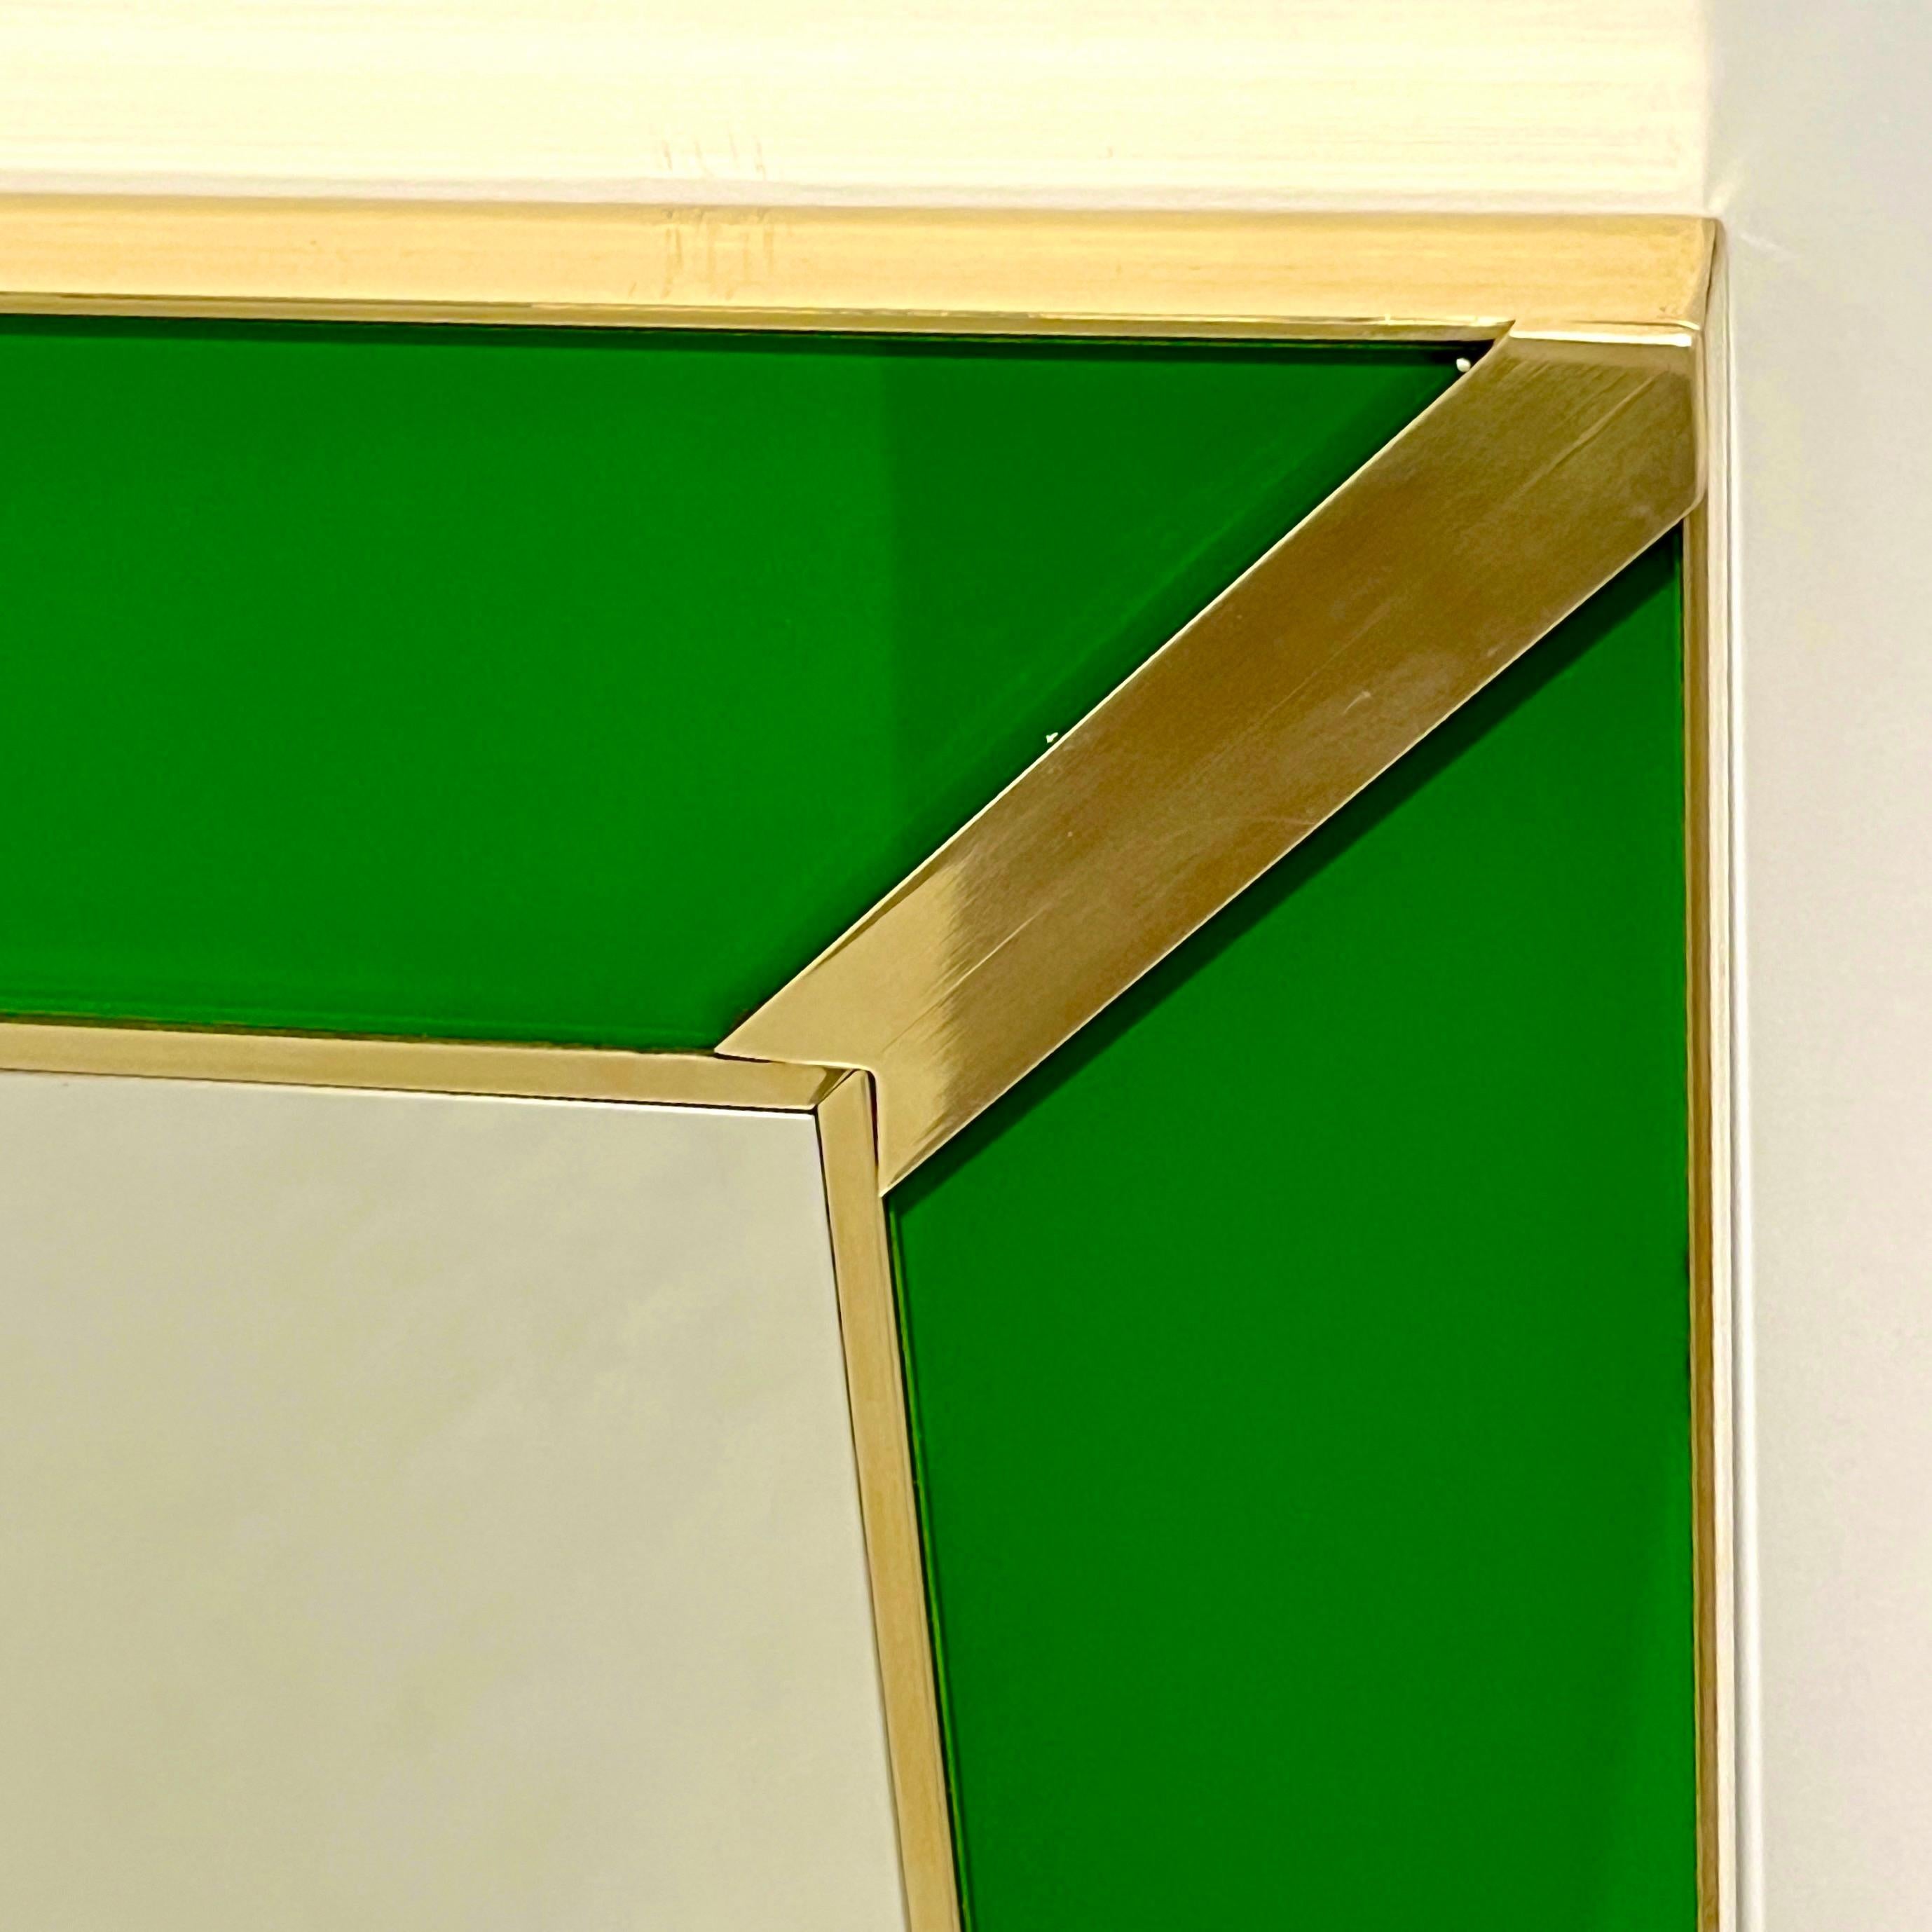 Hand-Crafted Contemporary Italian Minimalist Design Green Glass Mirror with Brass Accents For Sale